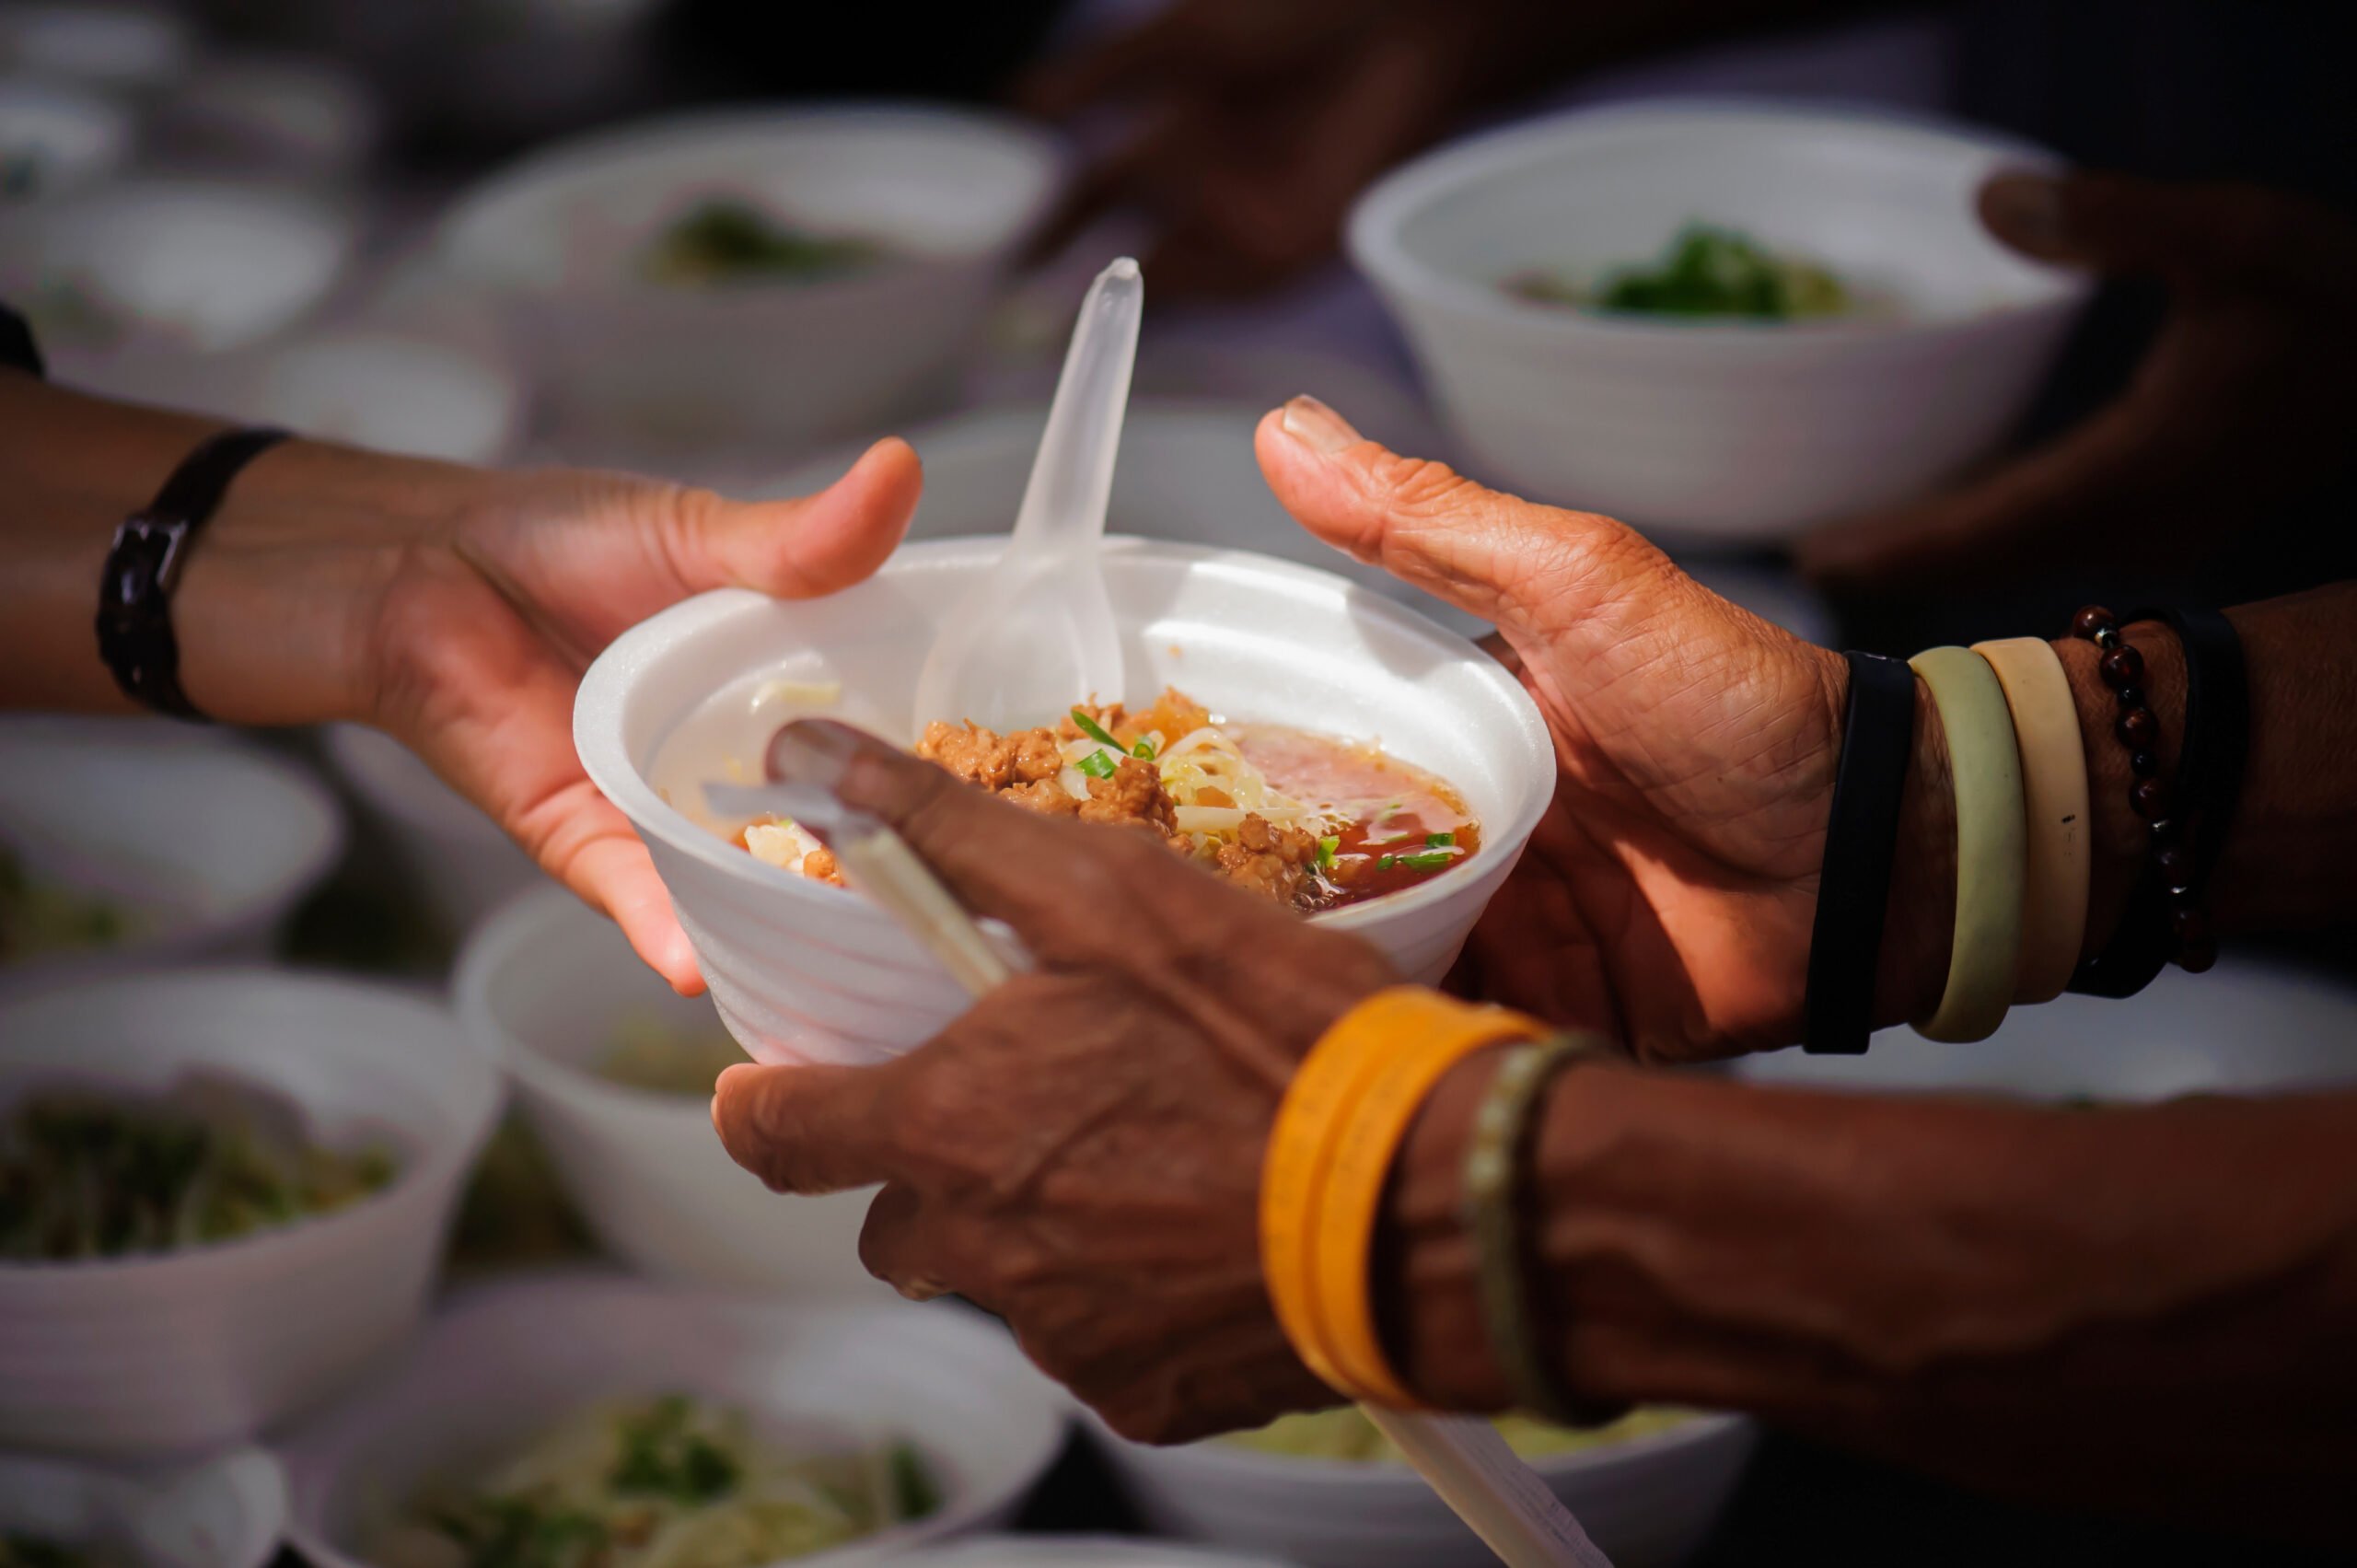 People sharing food. In this stock photo, similar to a Houston Food Not Bombs event, a volunteer hands a bowl of food to another person.